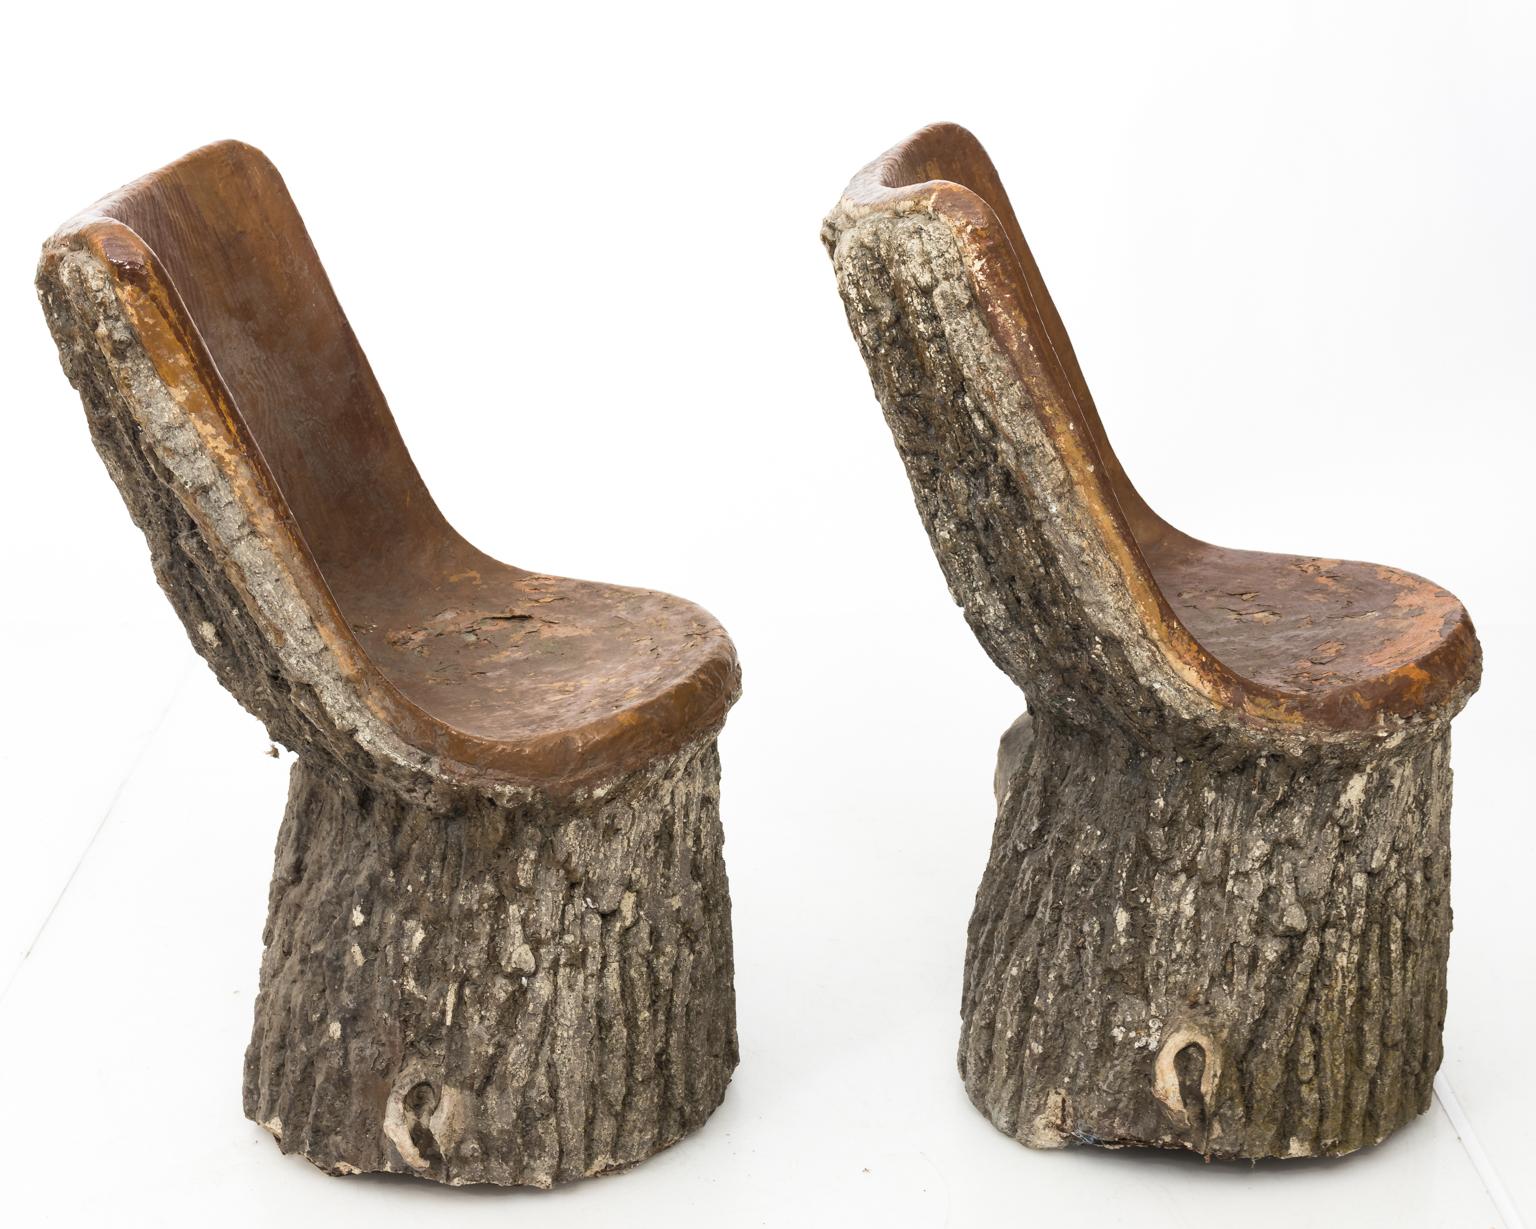 Pair of faux bois garden chairs with minor wear on the seat, circa 20th century.